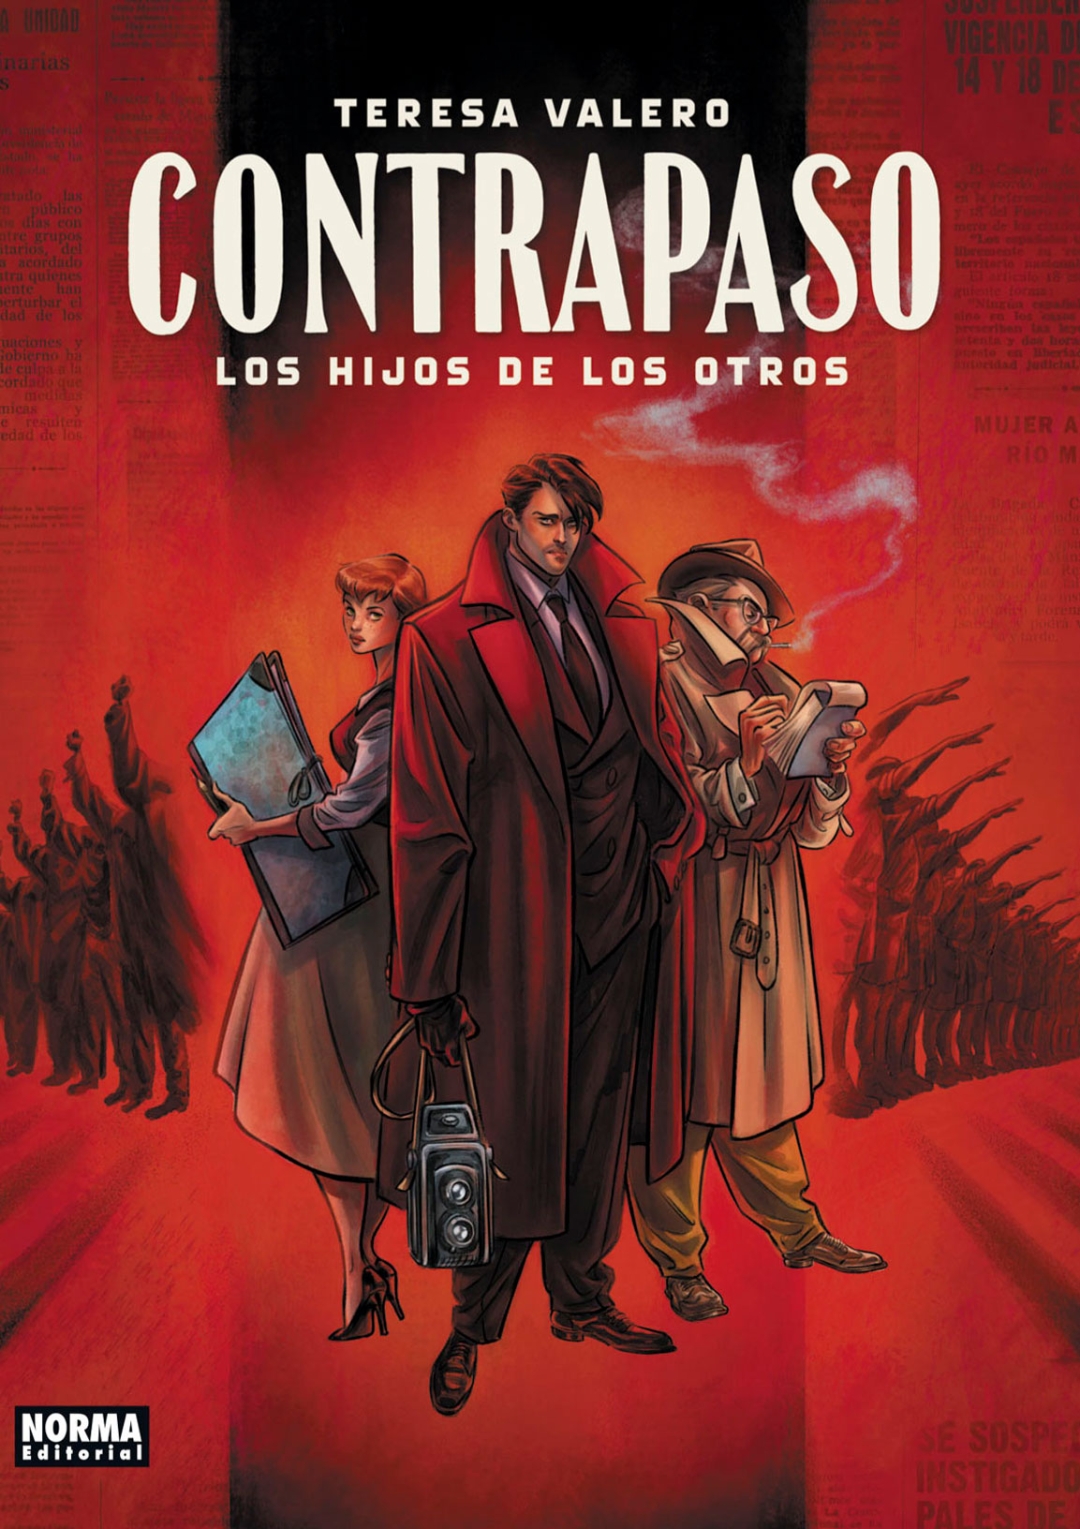 ‘Contrapaso. The Children of Others’, by Teresa Valero